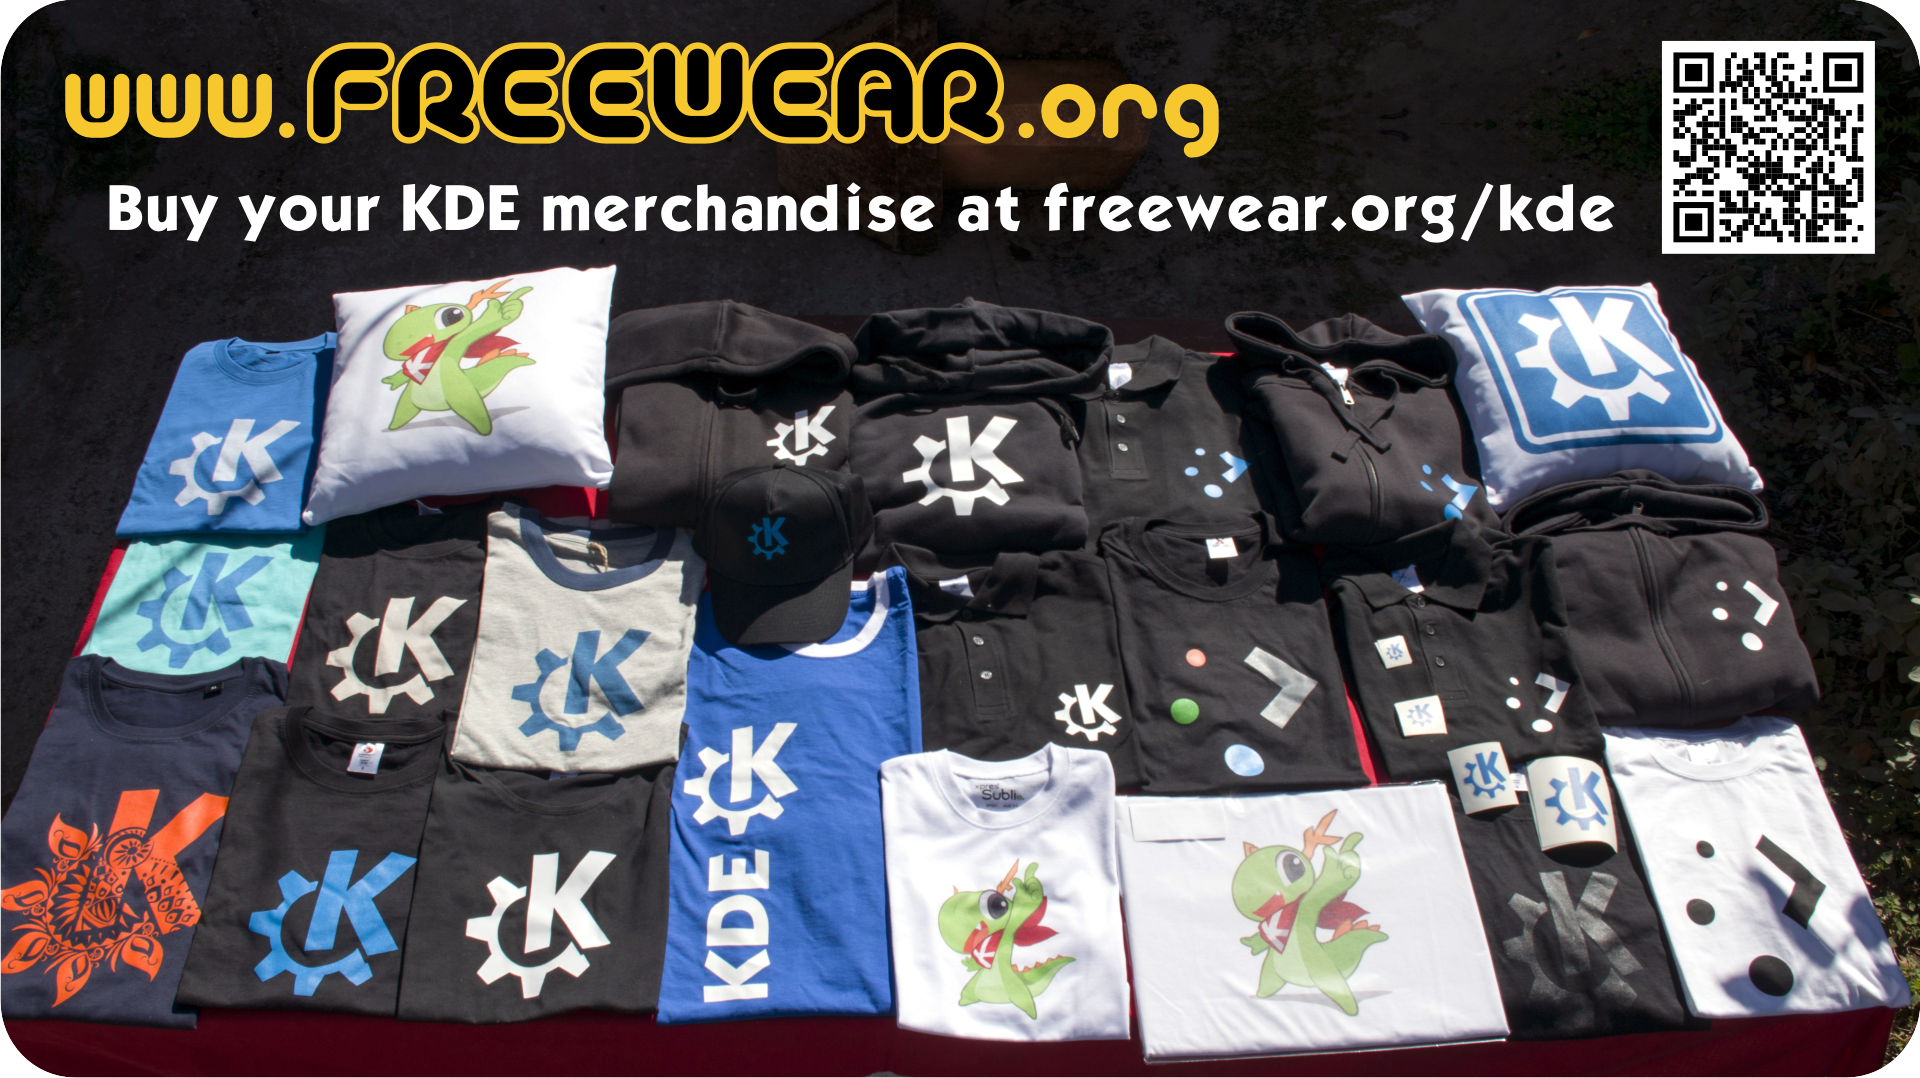 Image of KDE branded shirts and pillows from
Freewear